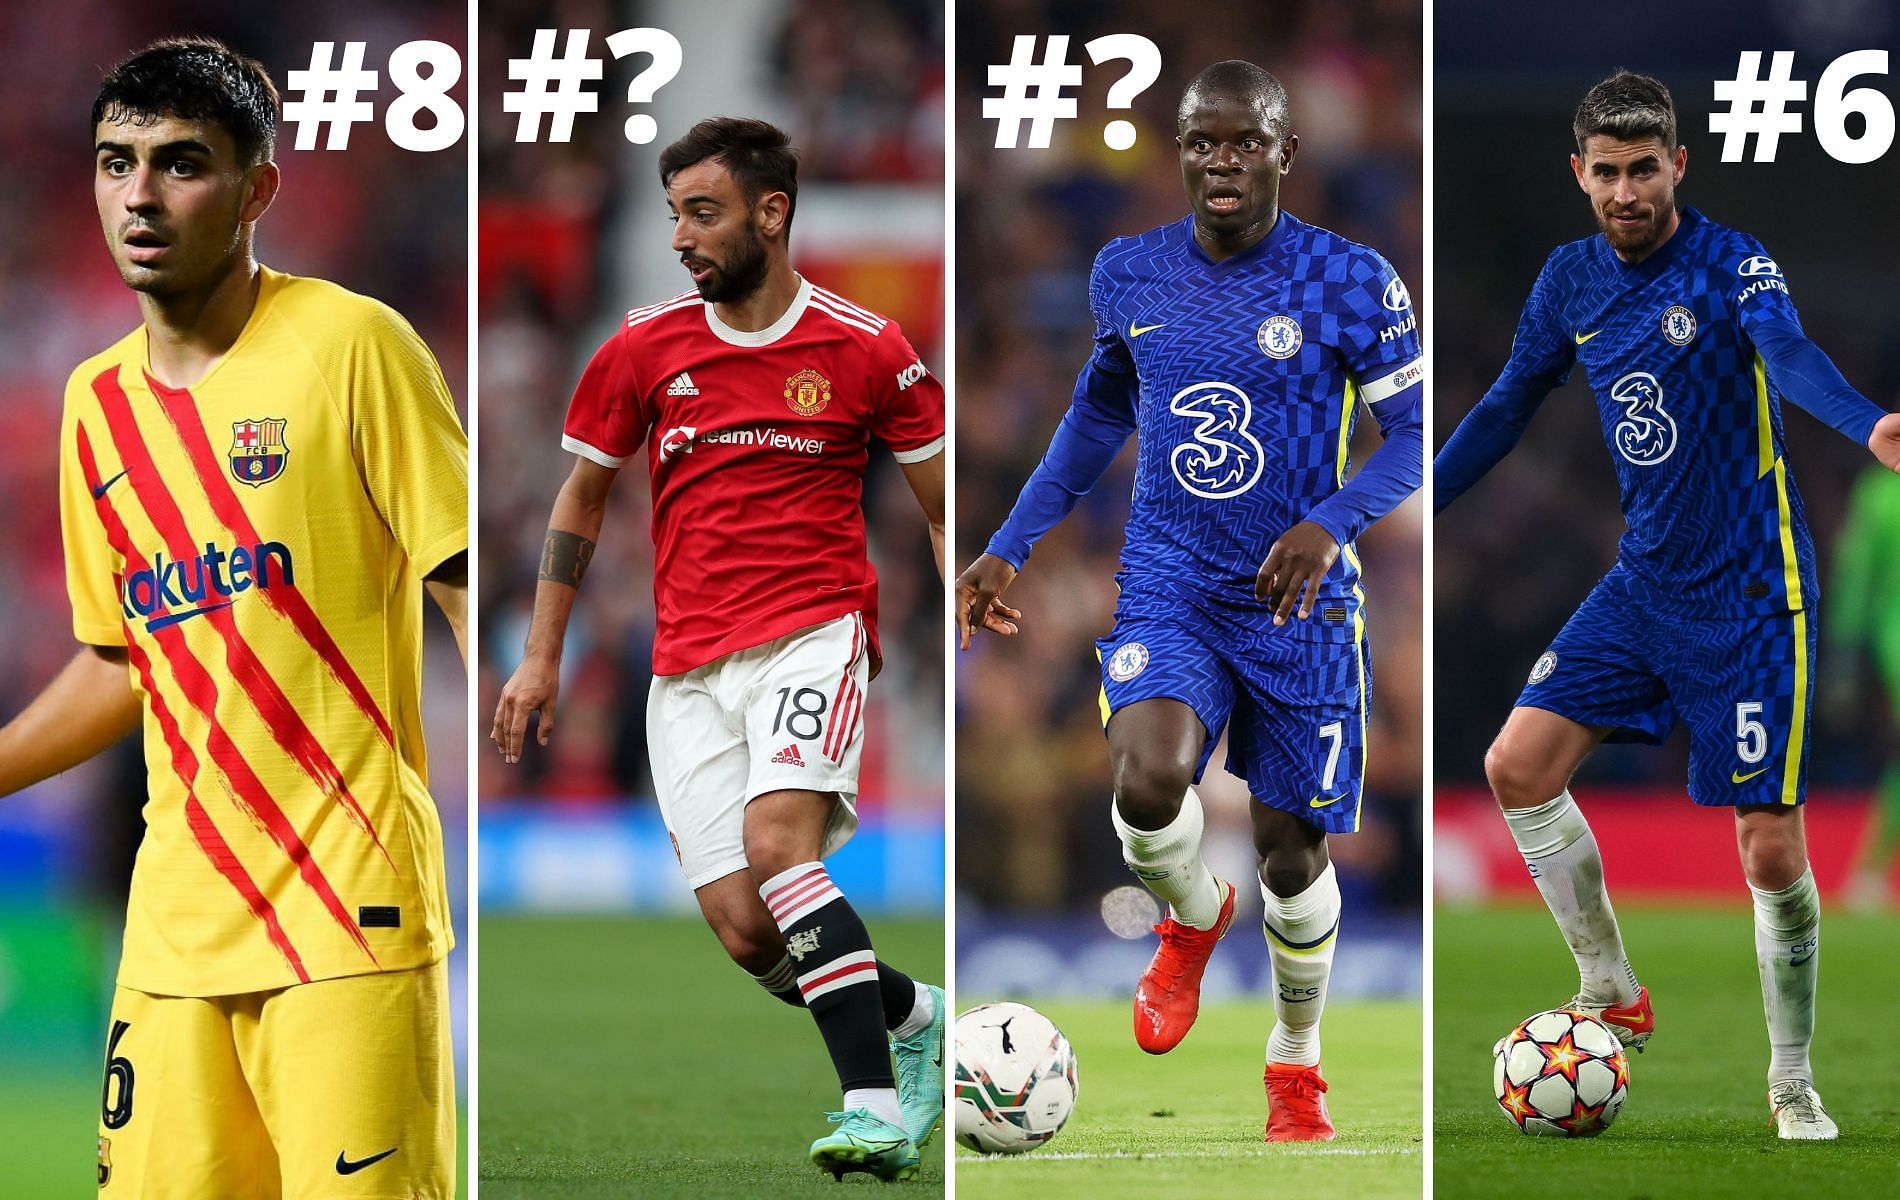 Who is the best midfielder in the world according to fans?